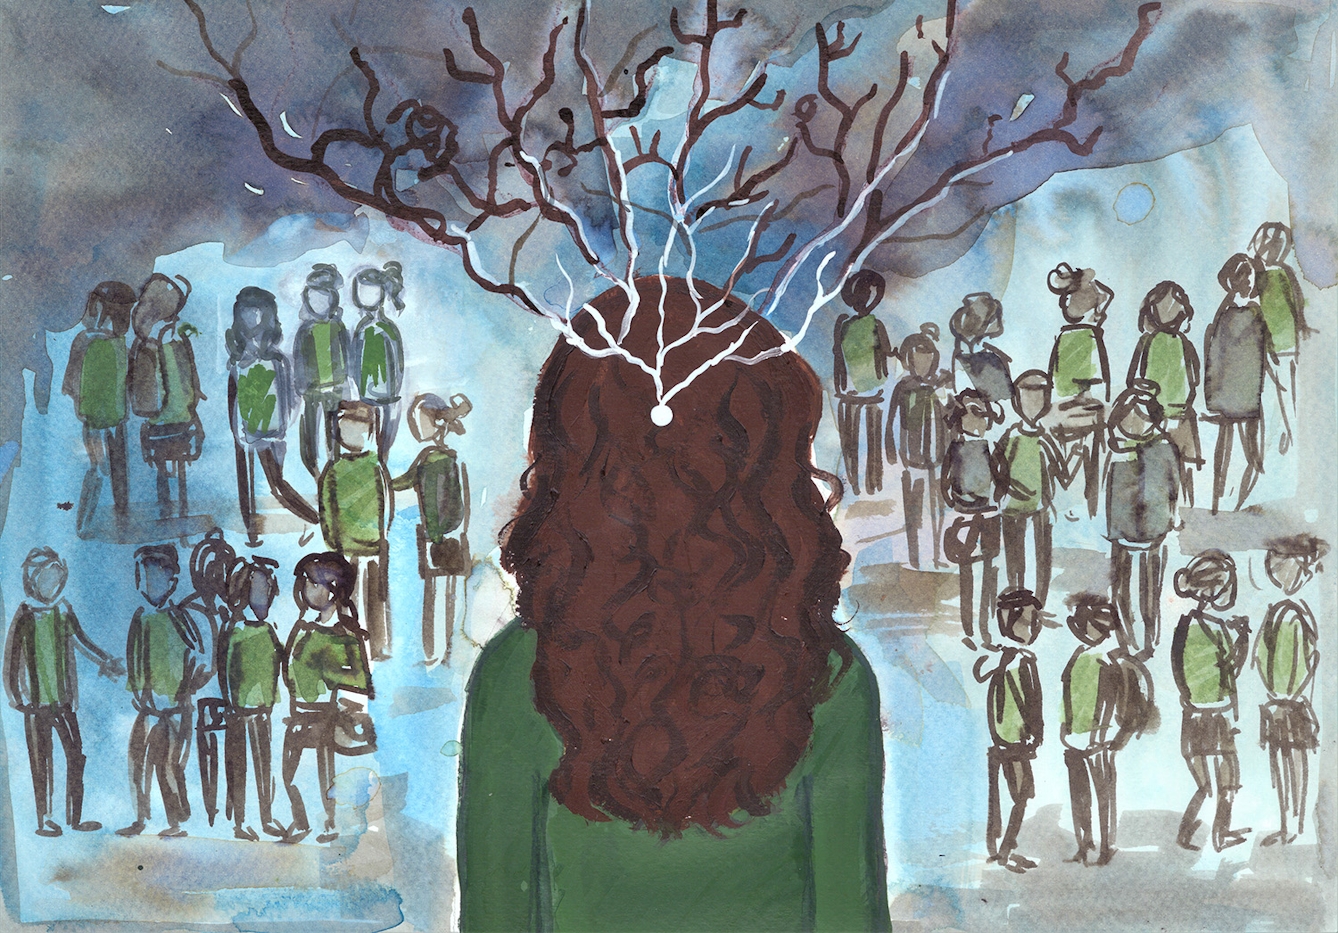 Photograph of a watercolour painting. In the centre foreground is a girl with brown curly hair. Her back is turned away, and she is looking out onto a group of several dozen school children. A white circle, representing the contraceptive pill, is shown in the centre of her head. A white branching line is coming out of the pill, with the branches extending out of the girl's head towards the sky. The children are wearing green uniform and are chatting in a number of small groups. Their faces are not clear. The sky is a  murky dark blue. 